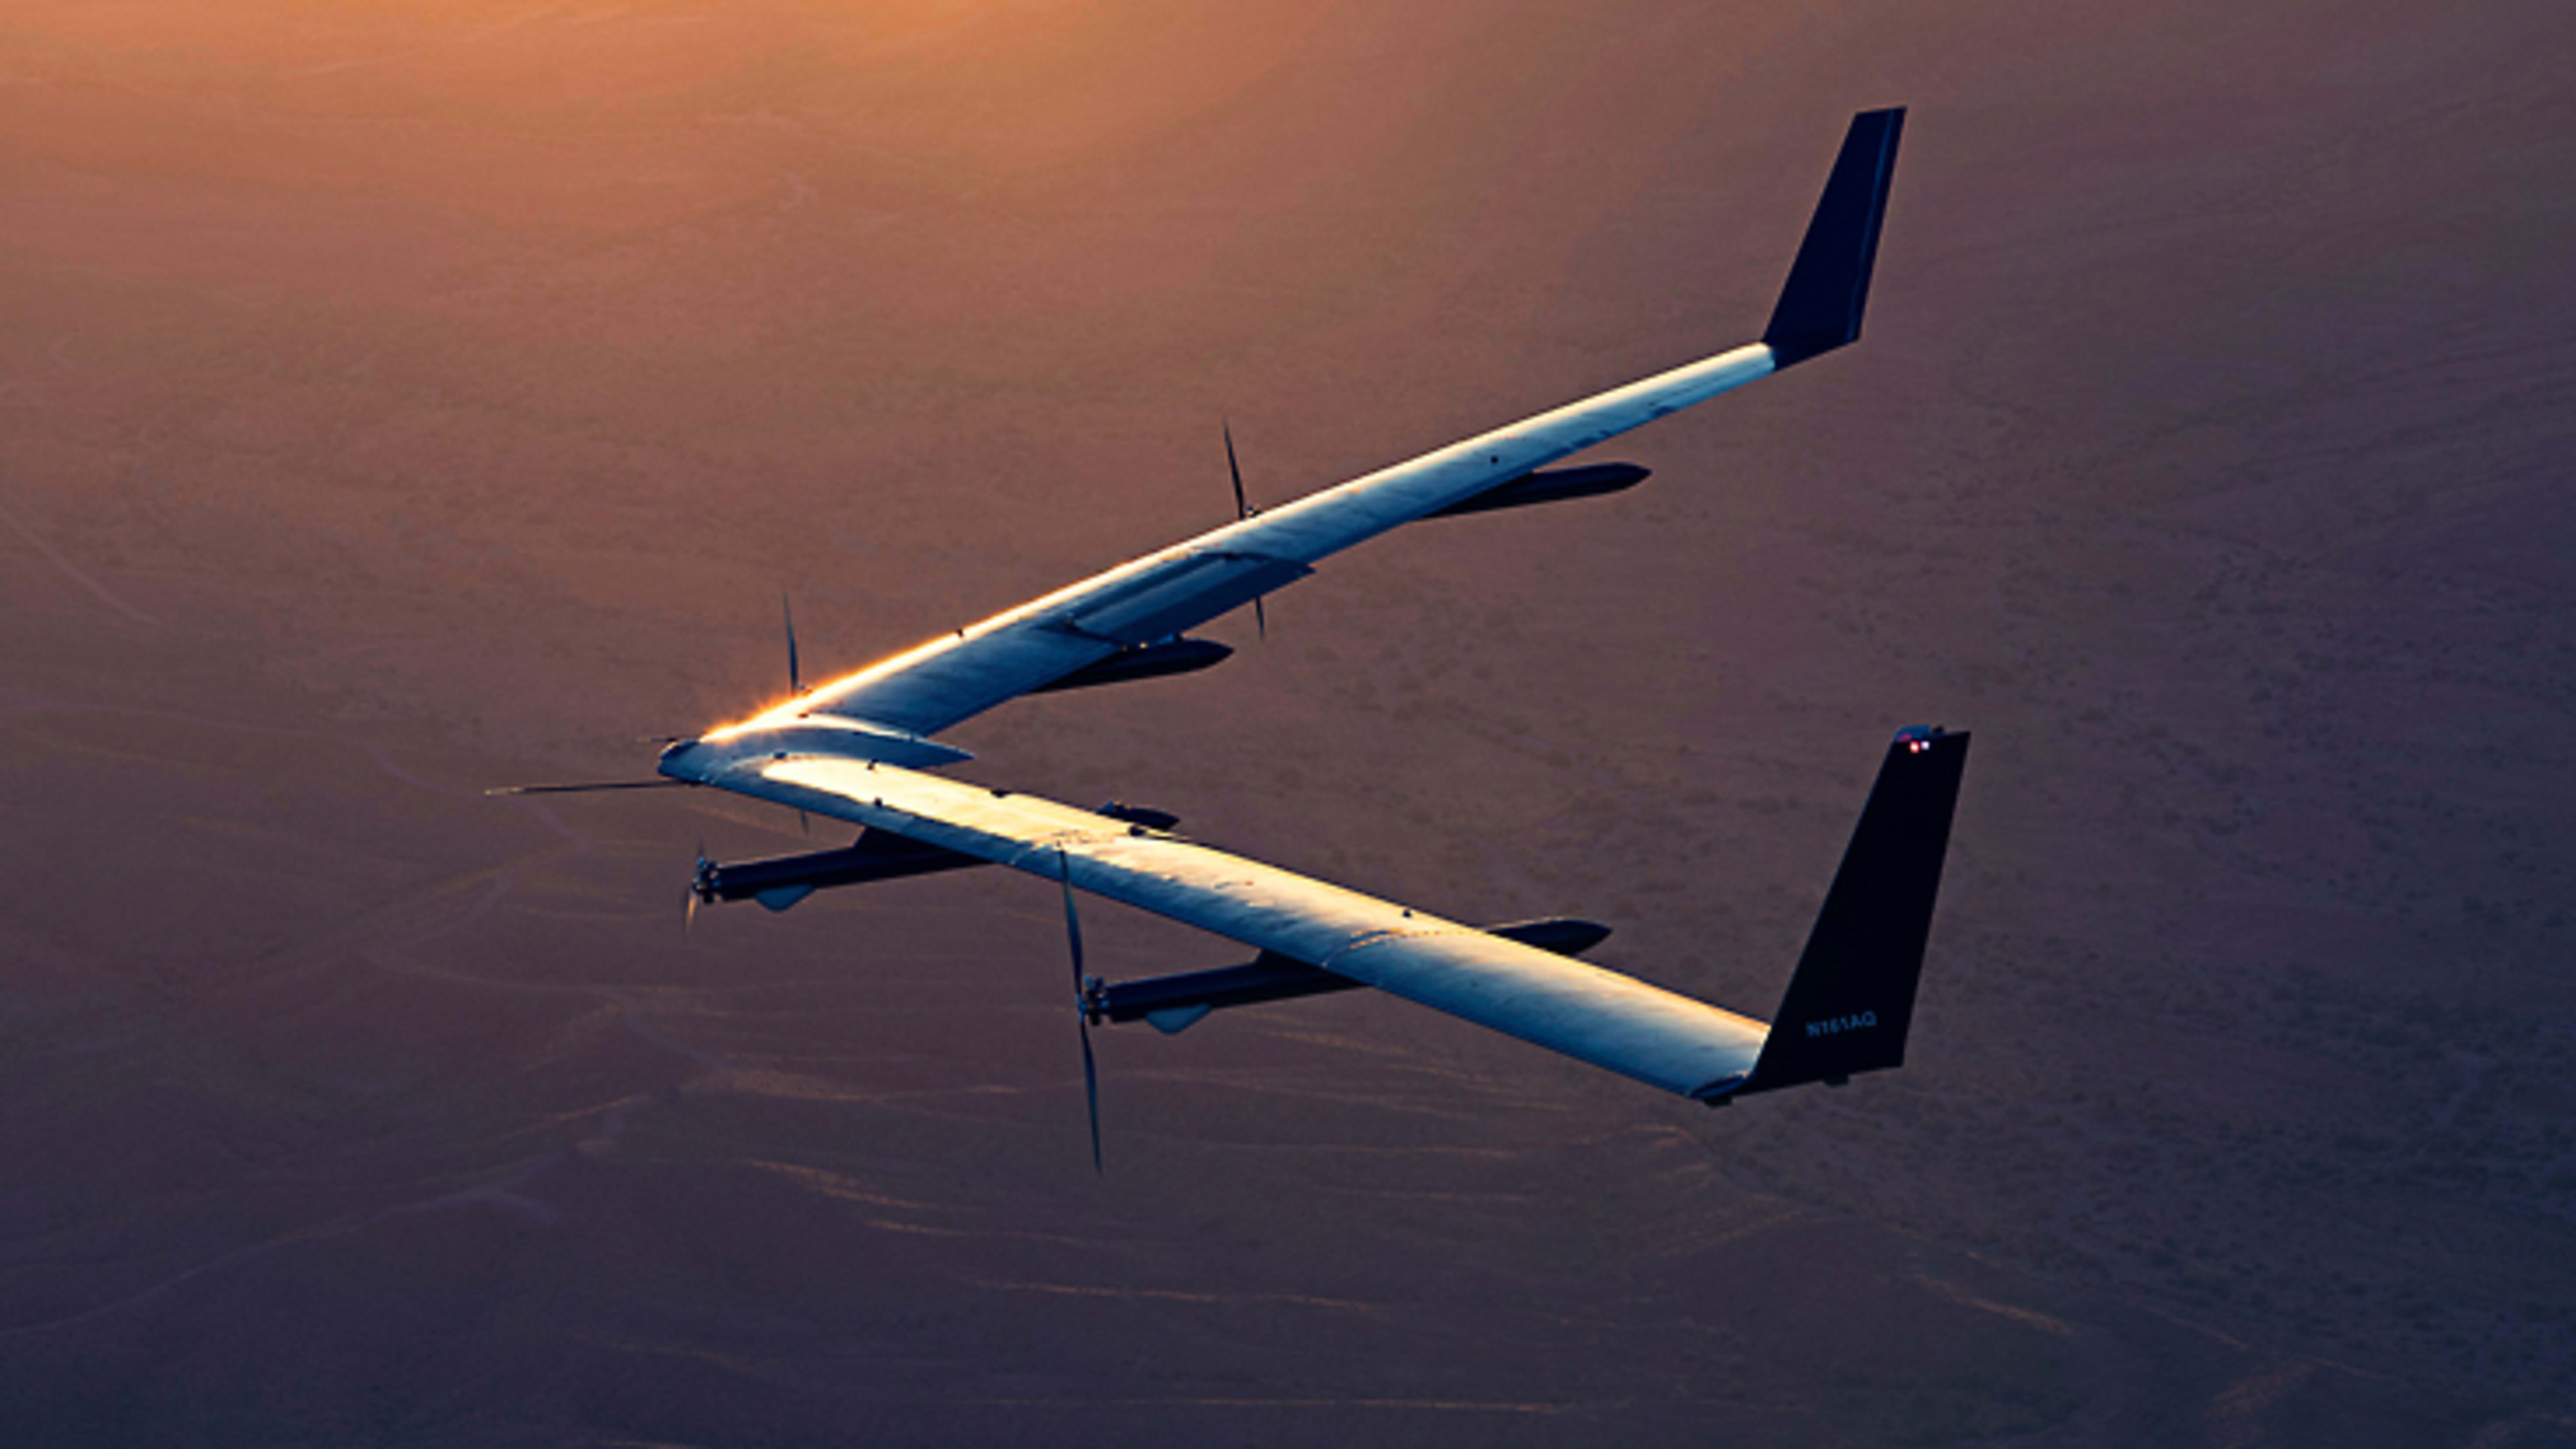 Aquila, Facebook’s Connectivity Drone, Completes Second Test Flight–This Time Without Crashing